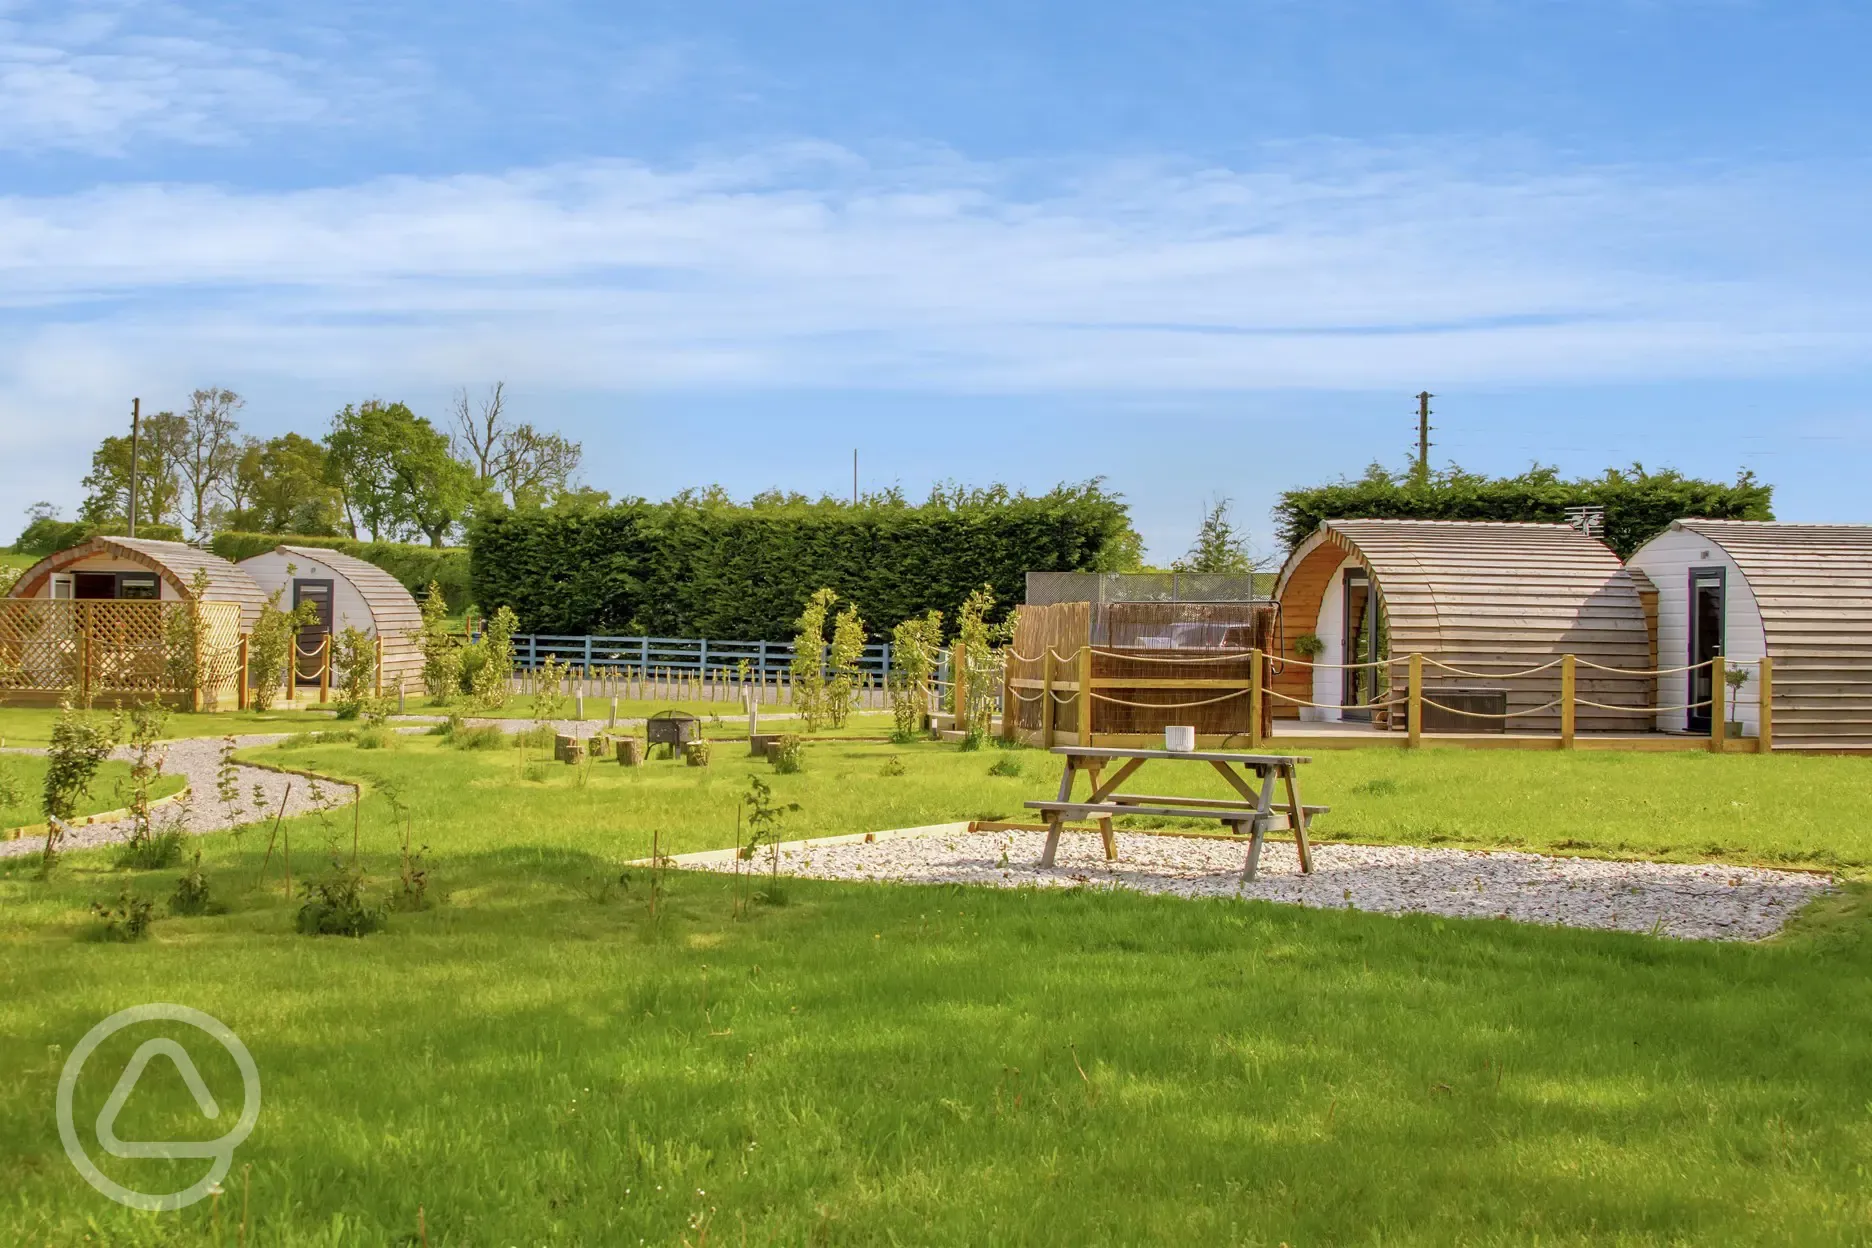 Glamping pods with outdoor seating